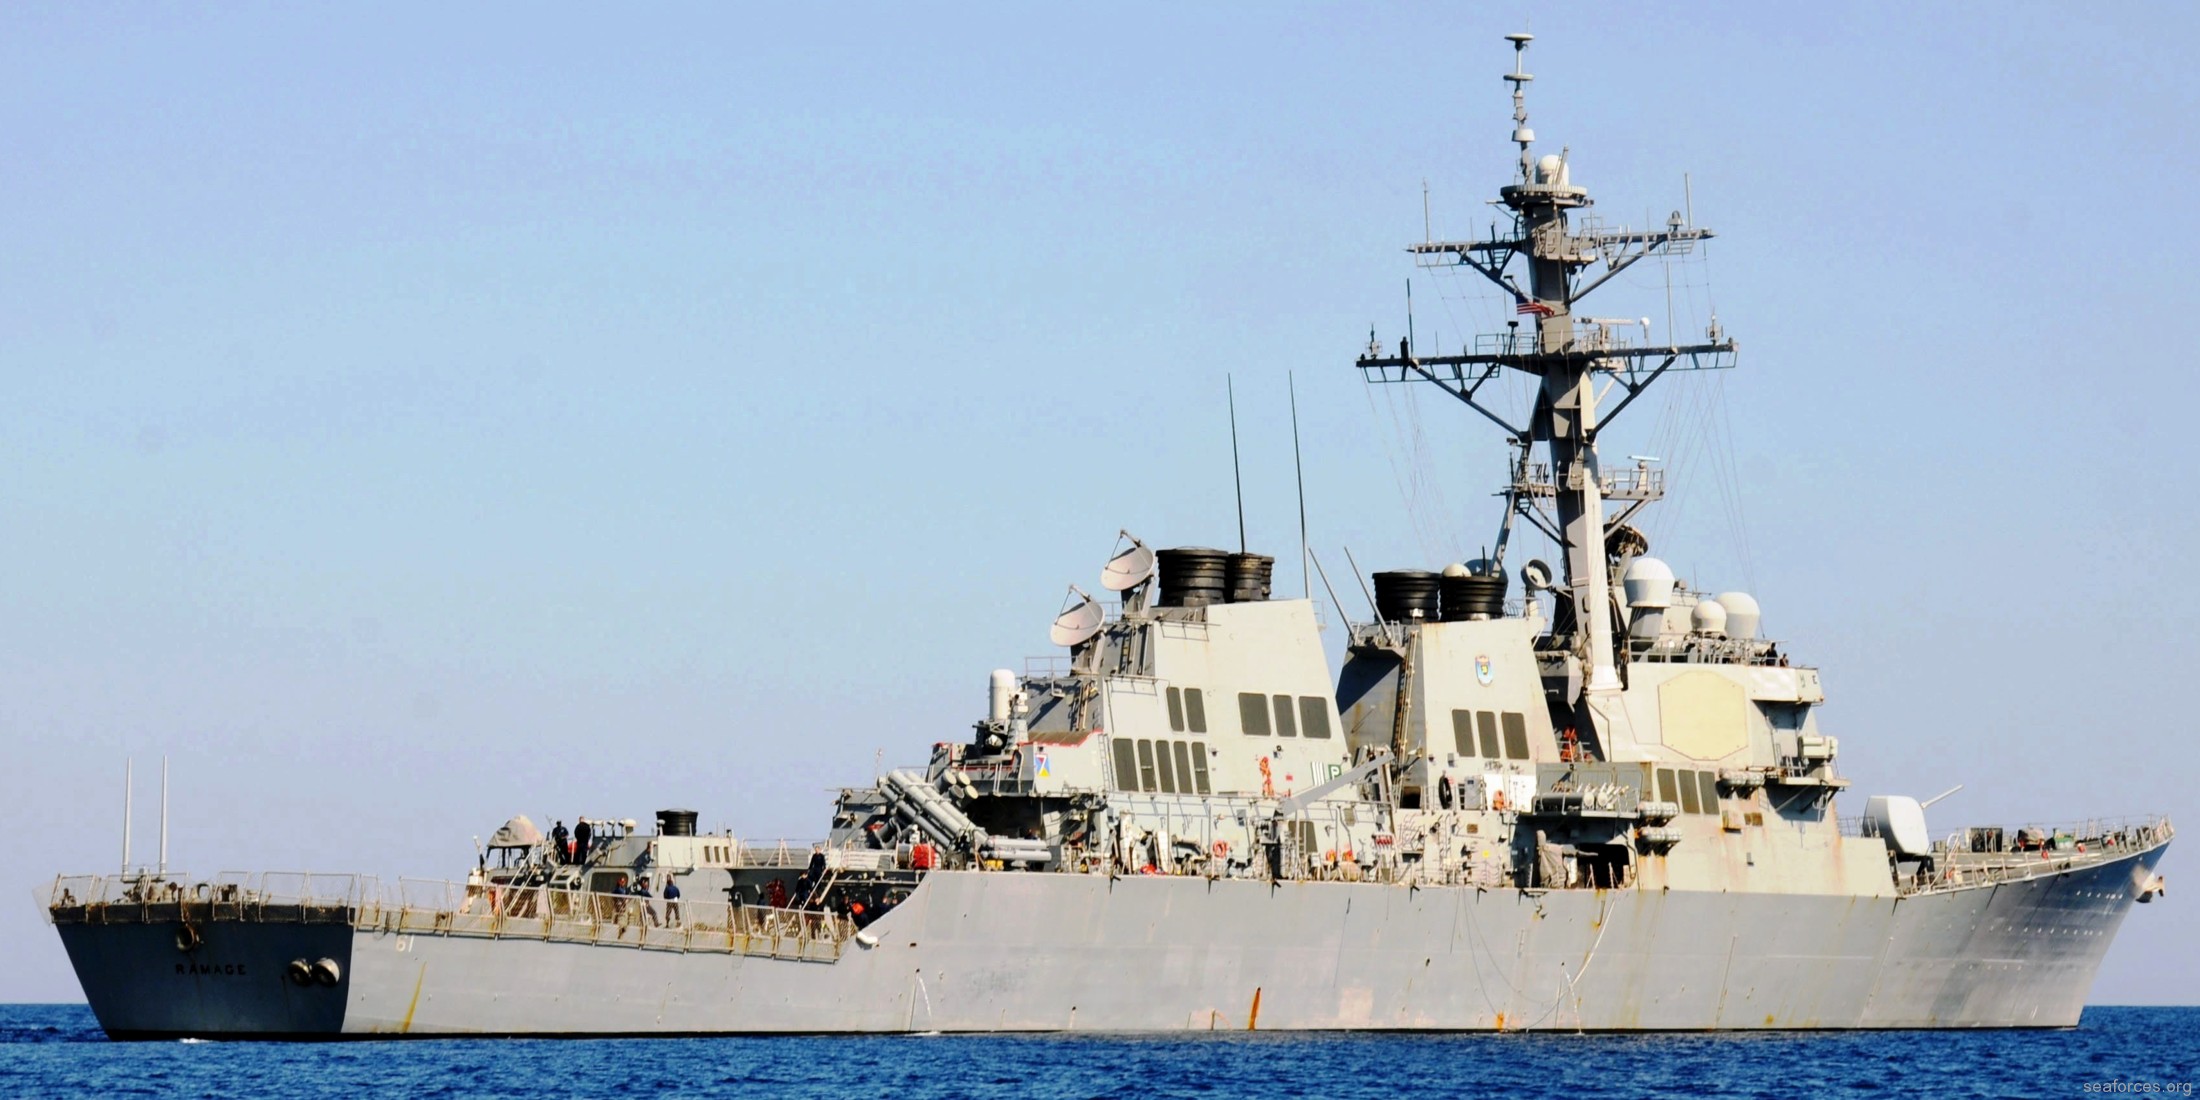 ddg-61 uss ramage guided missile destroyer us navy 83